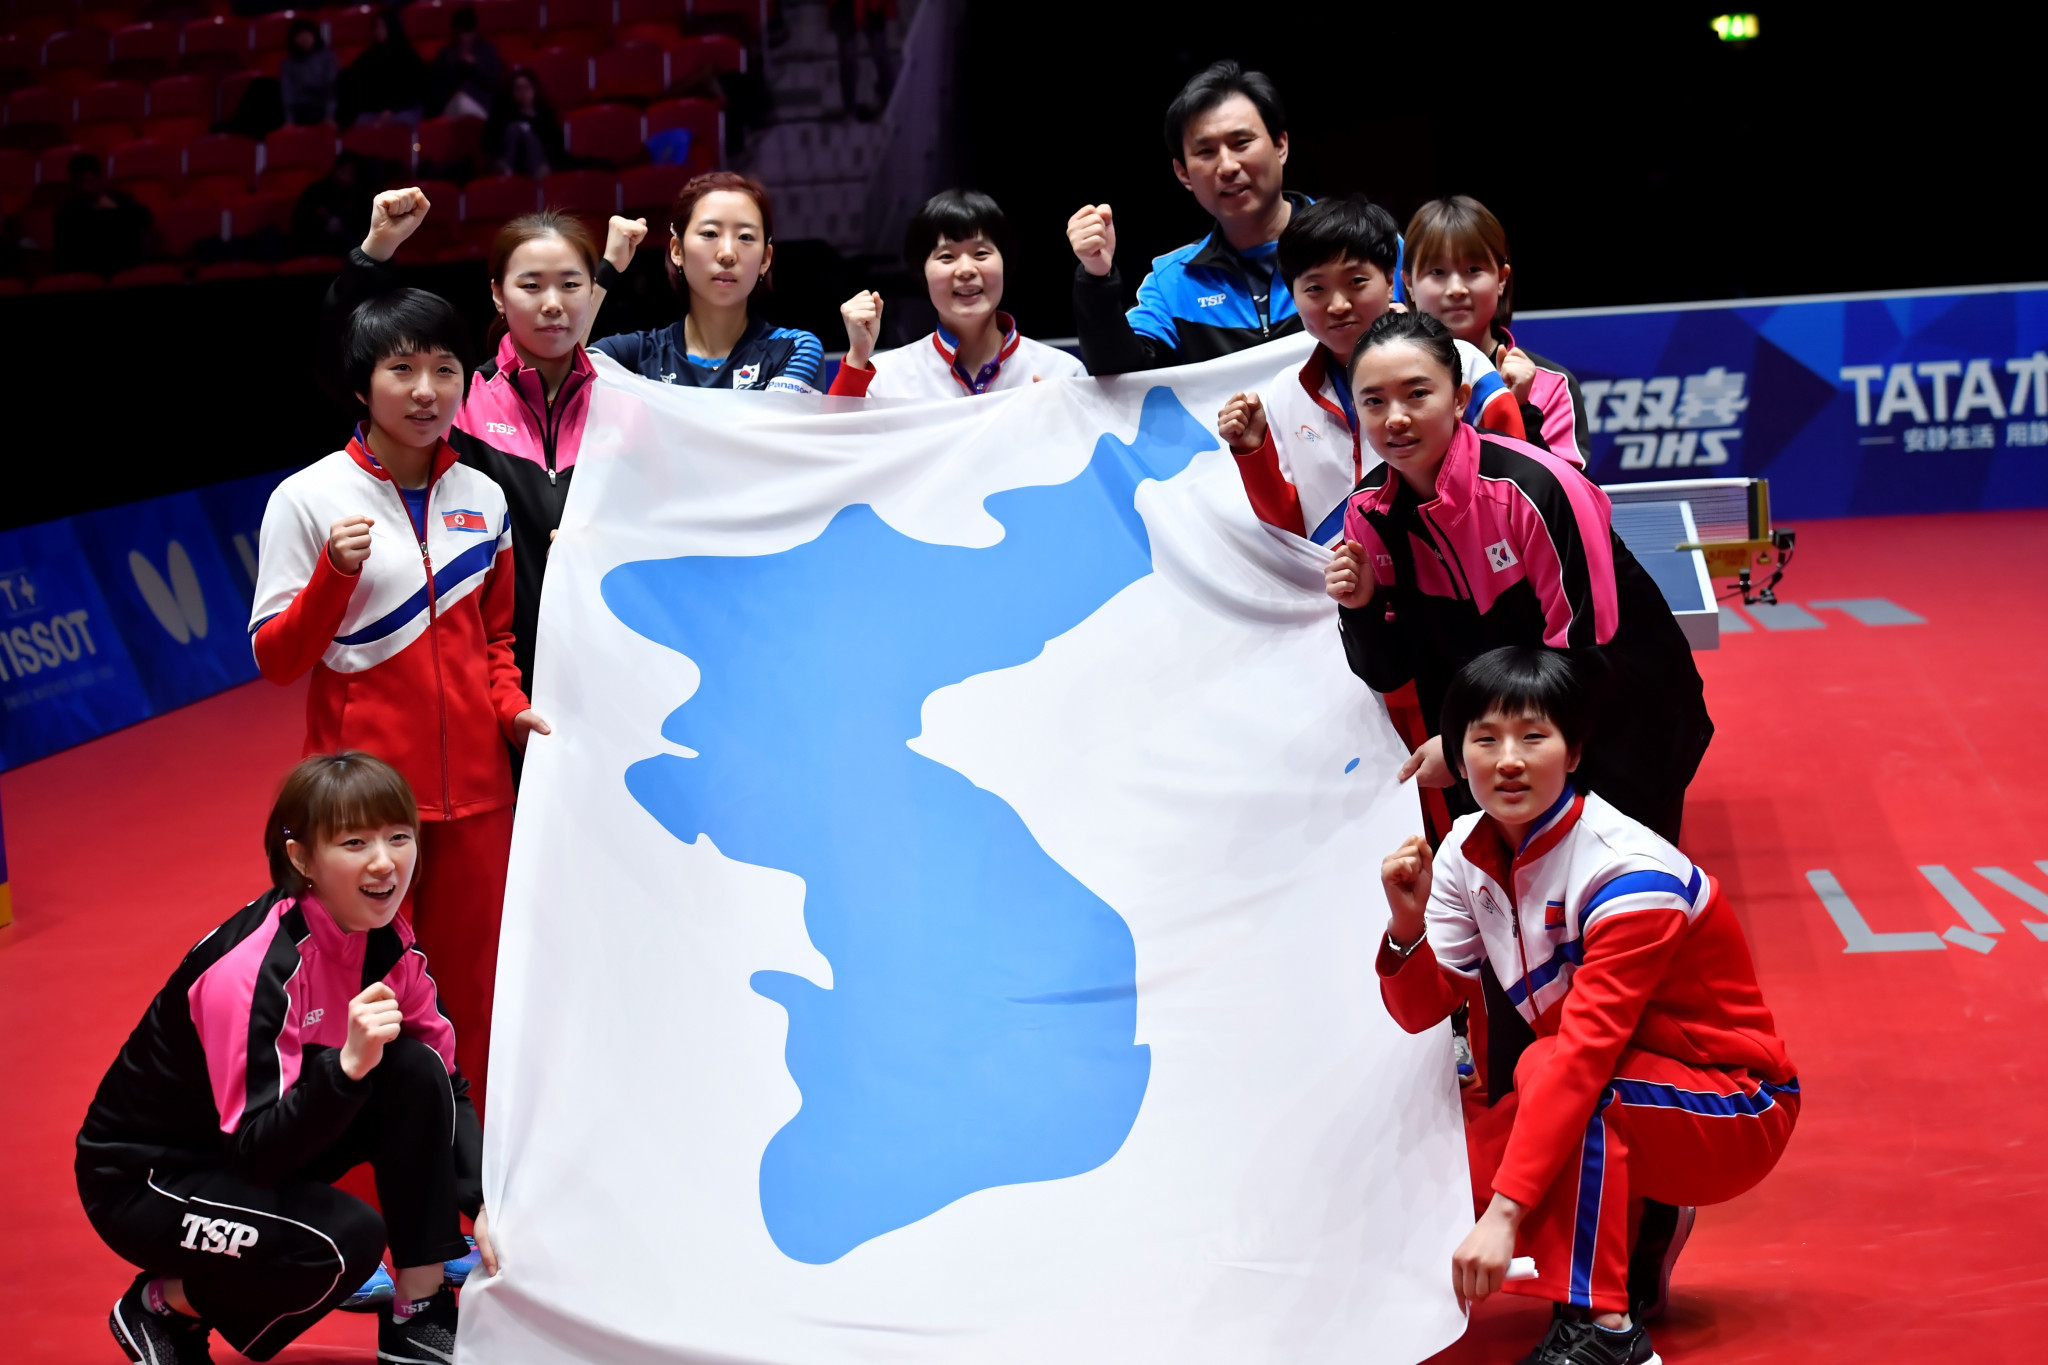 The joint Korean flag, seen here at the World Team Table Tennis Championships, will be used in Mongolia ©Getty Images